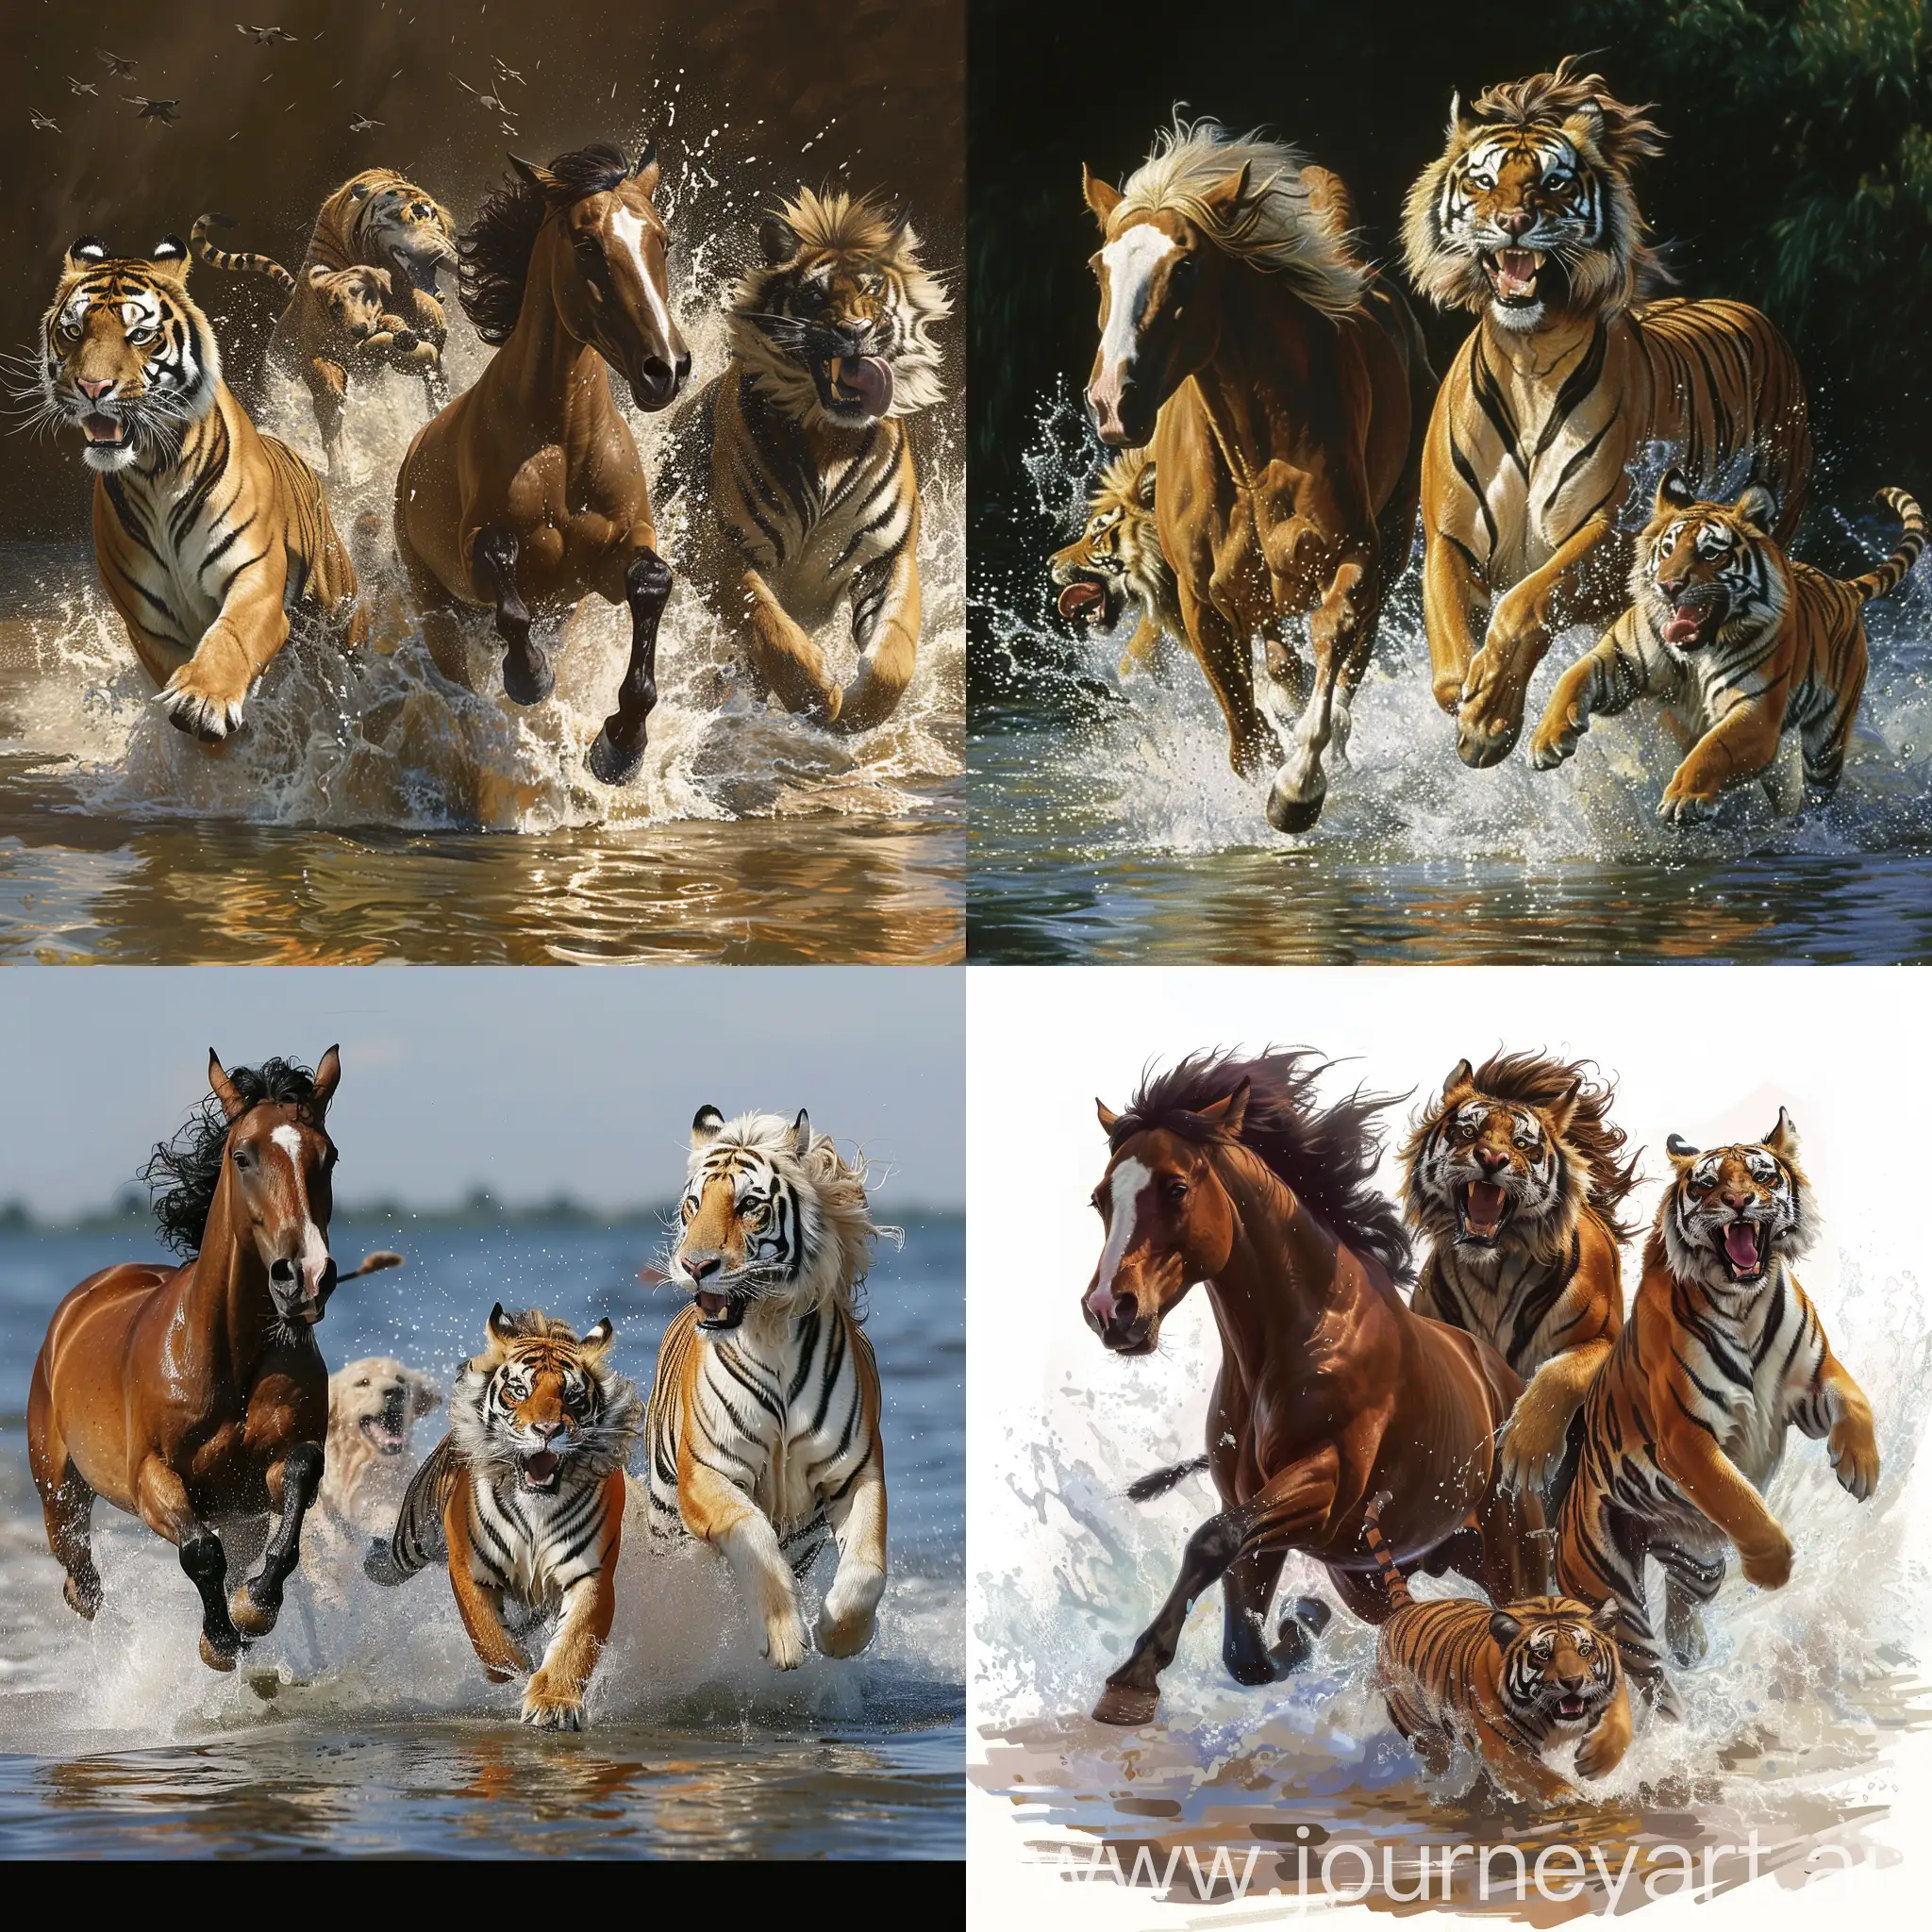 Playful-Horse-Tiger-and-Dog-Running-Together-on-Water